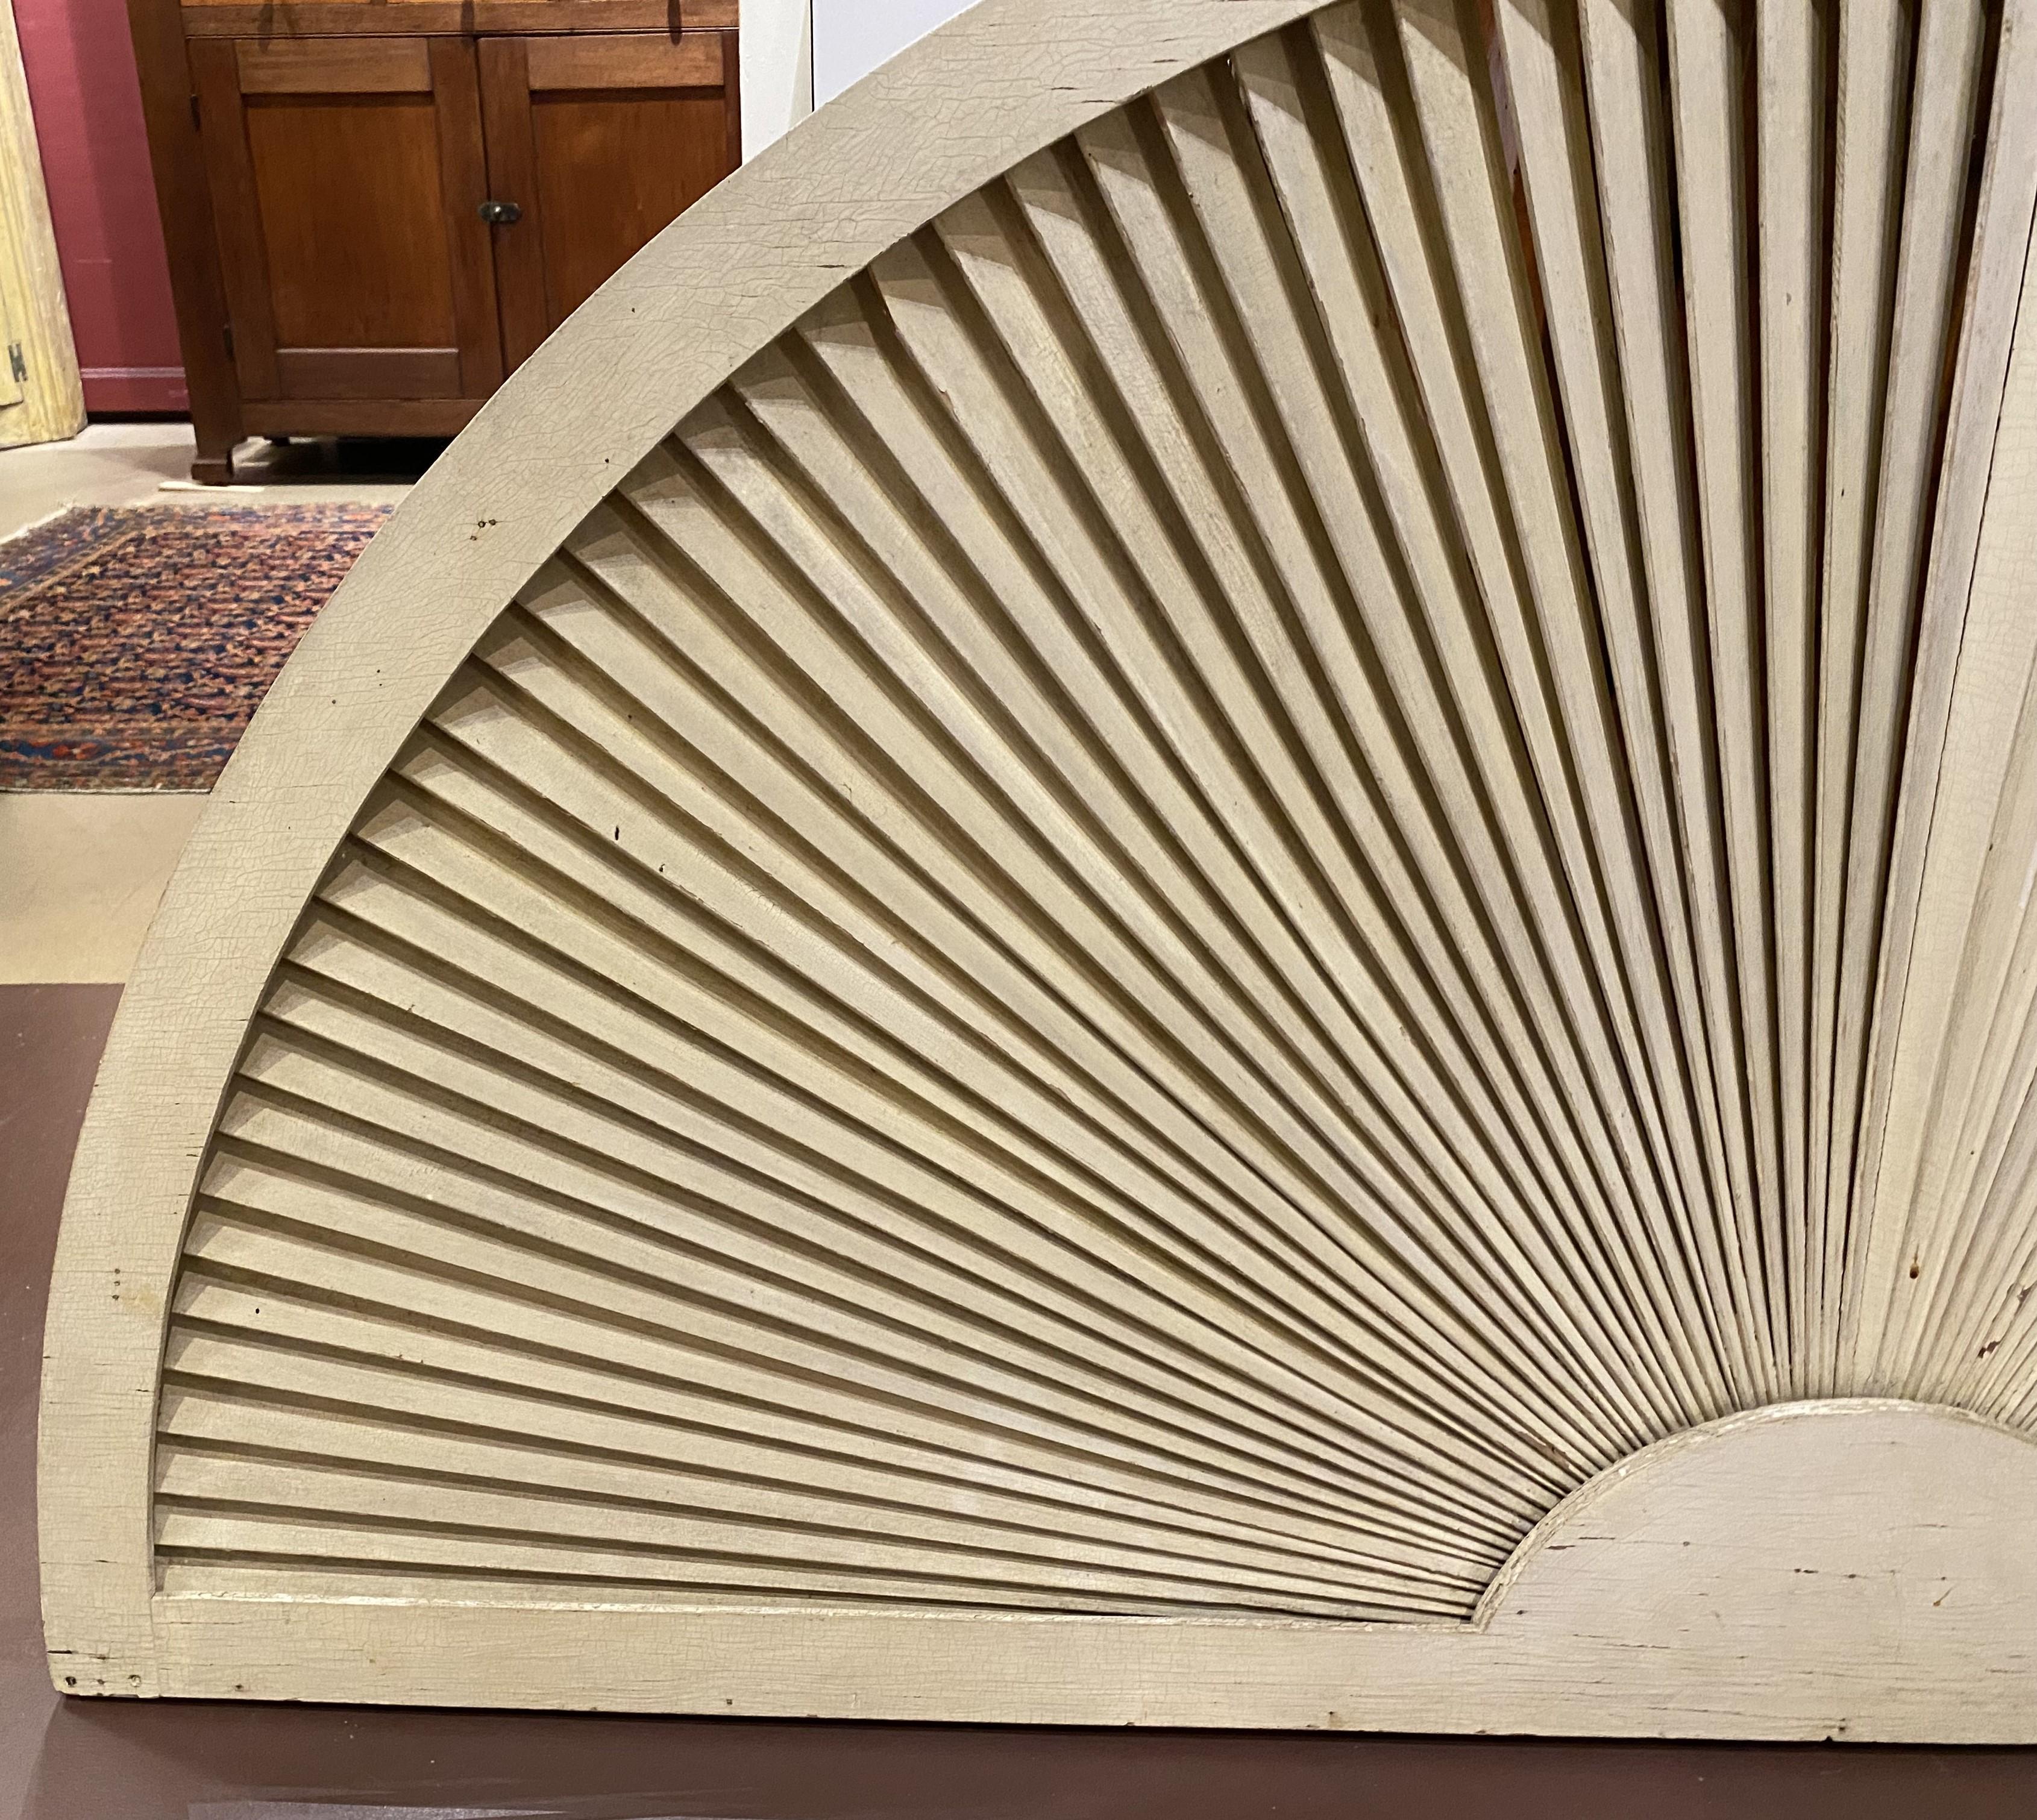 A nice example of an architectural wooden radial fan form element in old white paint, dating to the late 19th or early 20th century, in very good overall condition, with some minor paint losses and craquelure on the blades, minor imperfections and